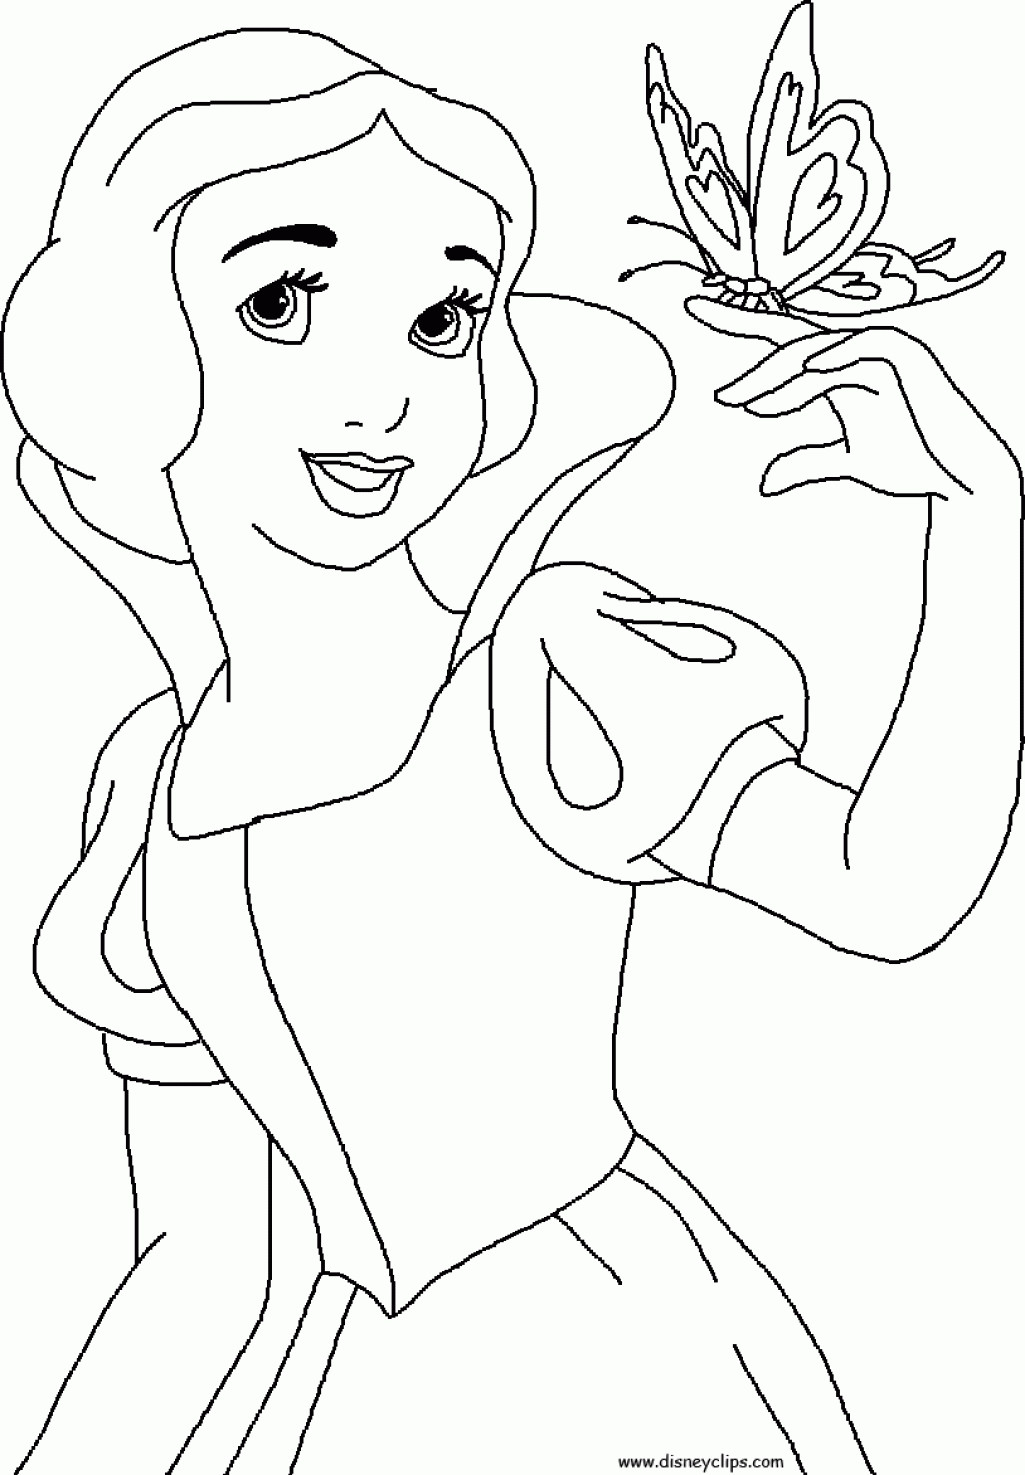 Free Coloring Sheets Disney
 Free Disney Princess Coloring Pages For You Image 10